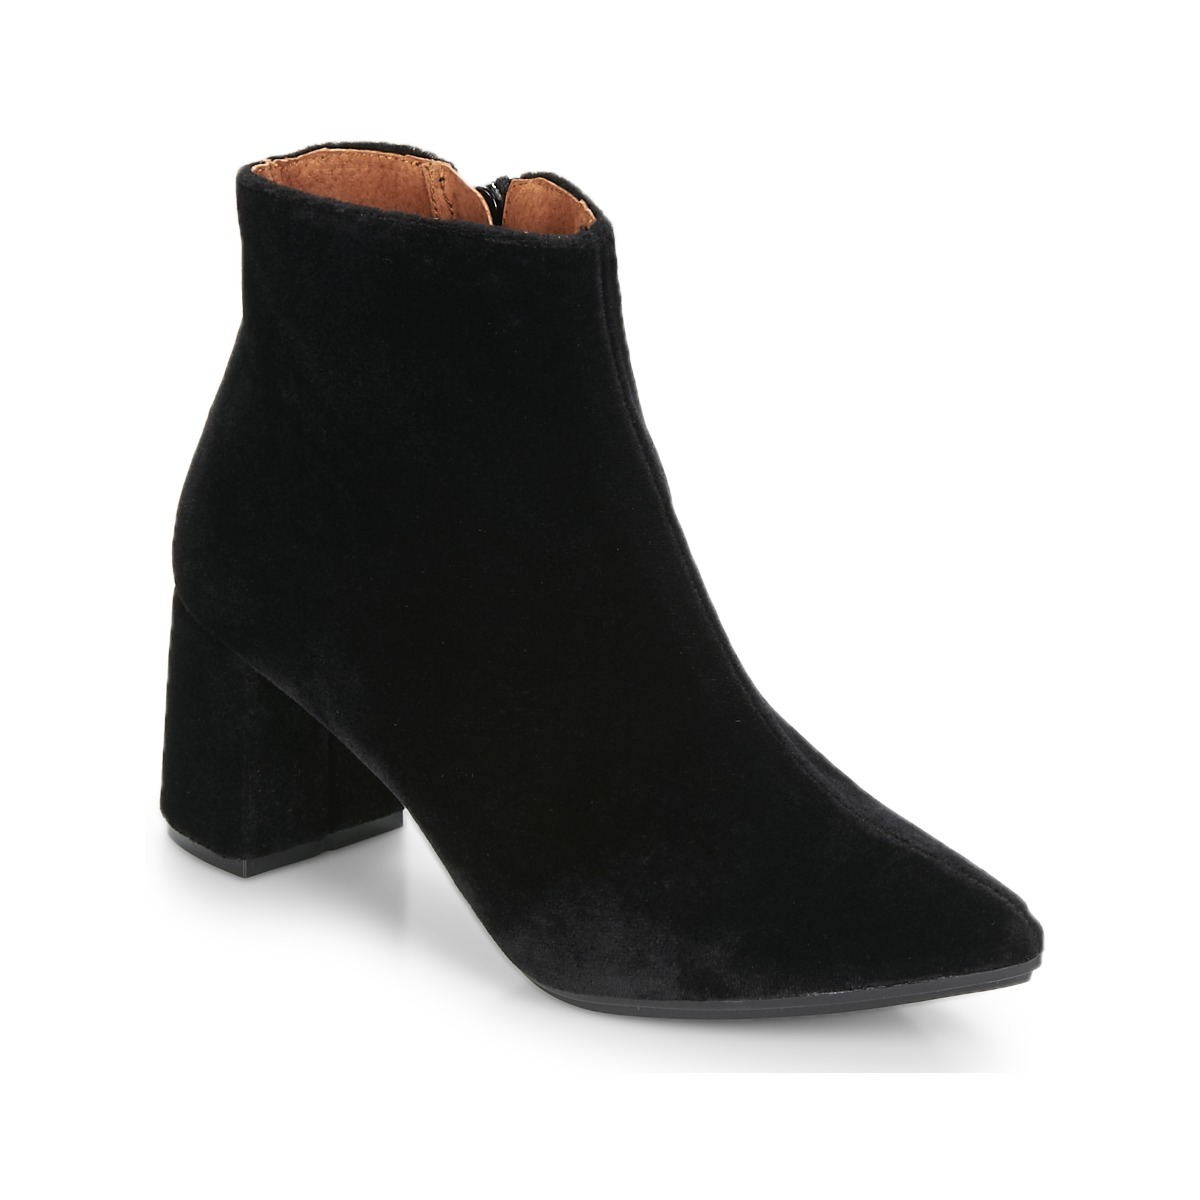 Betty London - Ankle Boots - Black - Spartoo - Woman GOOFASH